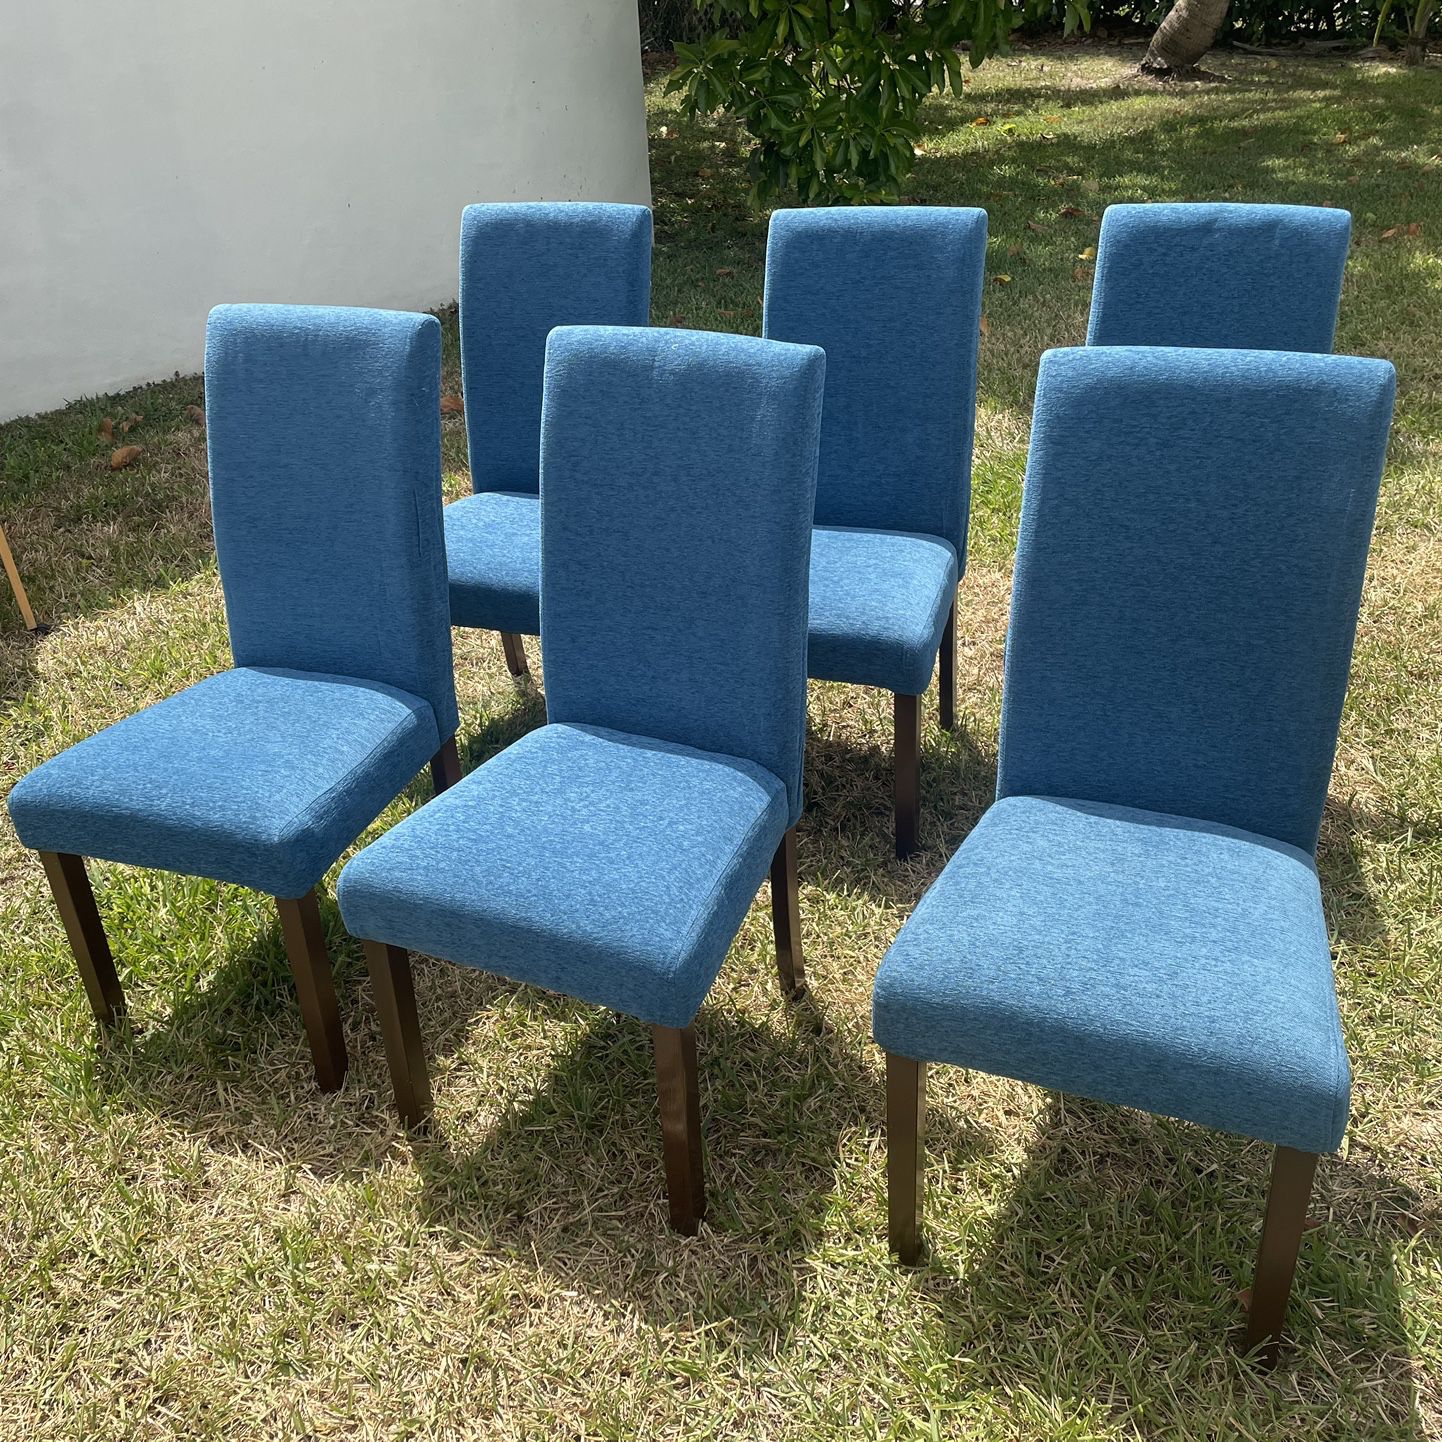 Chairs set of six